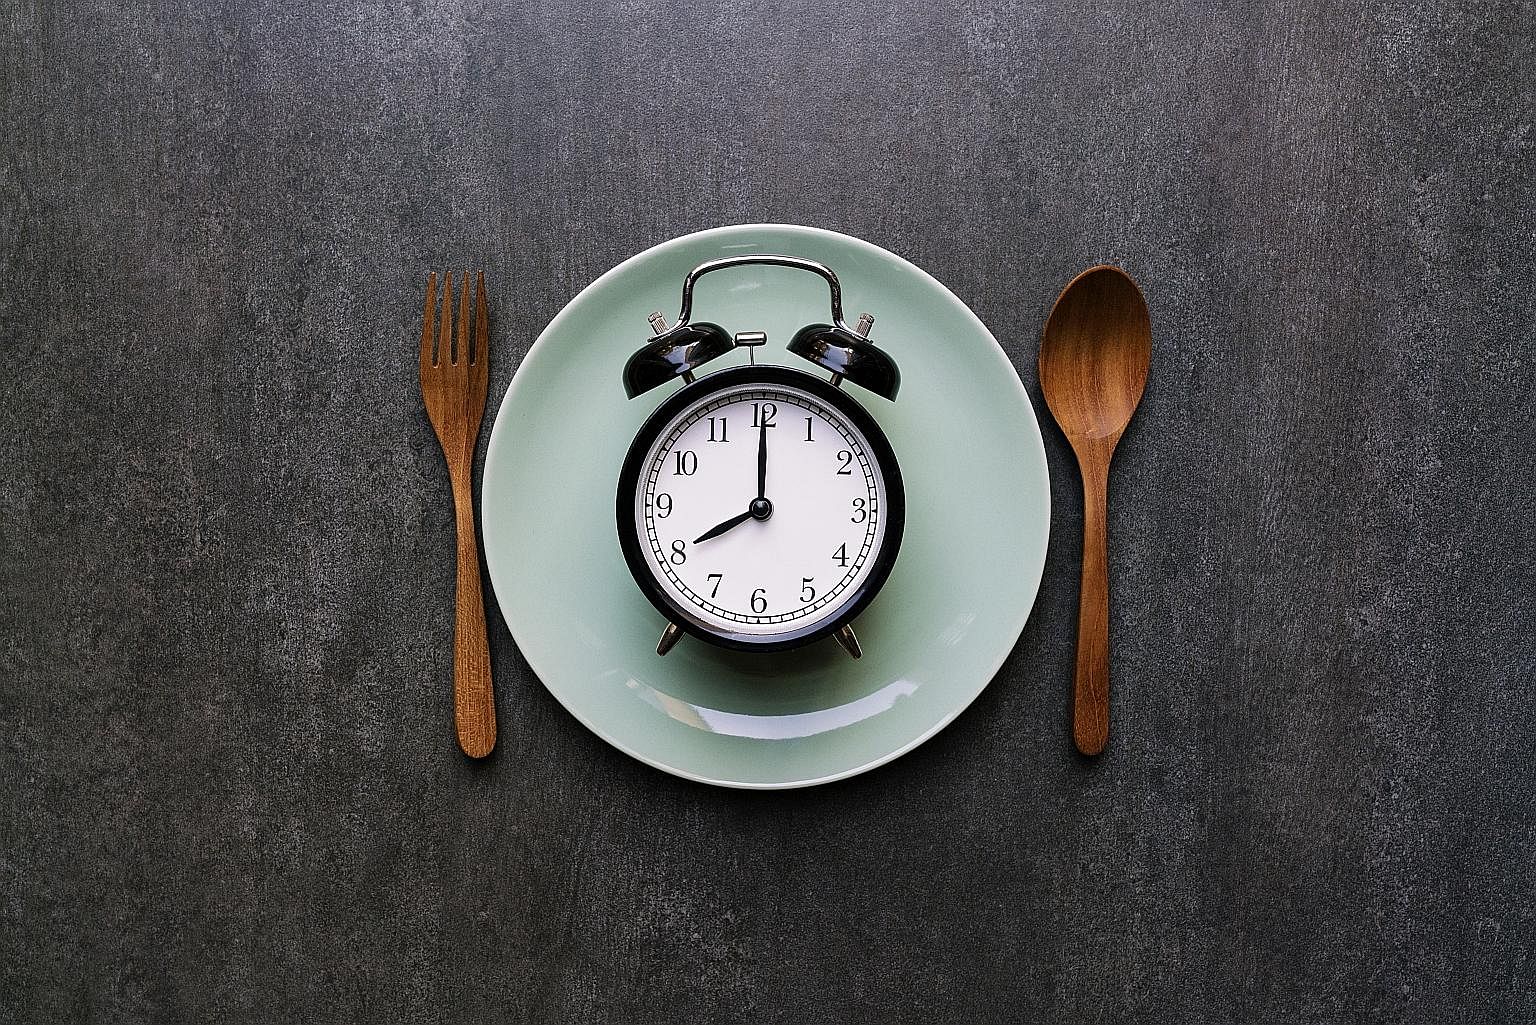 The intermittent fasting regimen involves fasting for certain hours of the day, or for entire days, consecutively or not.